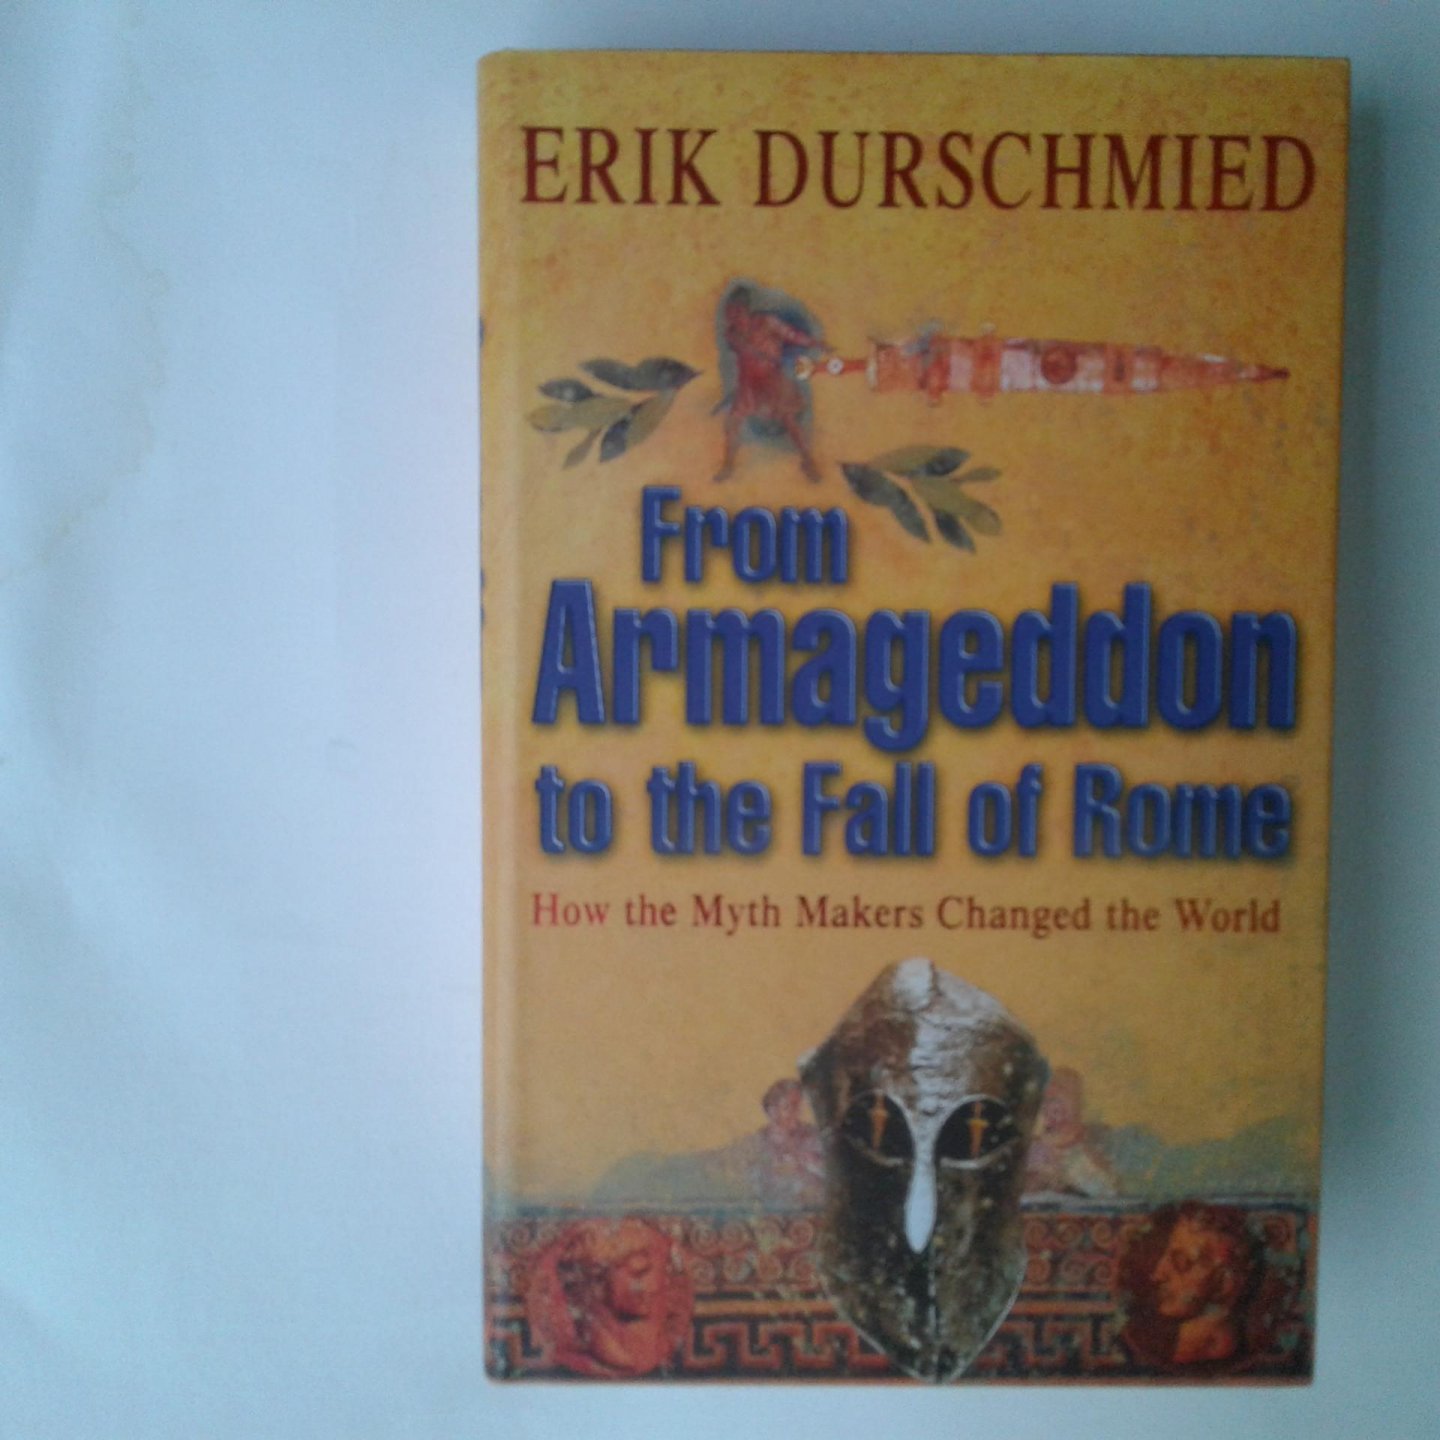 Durschmied, Erik - From Armageddon to the Fall of Rome ; How the Myht Makers Changed the World